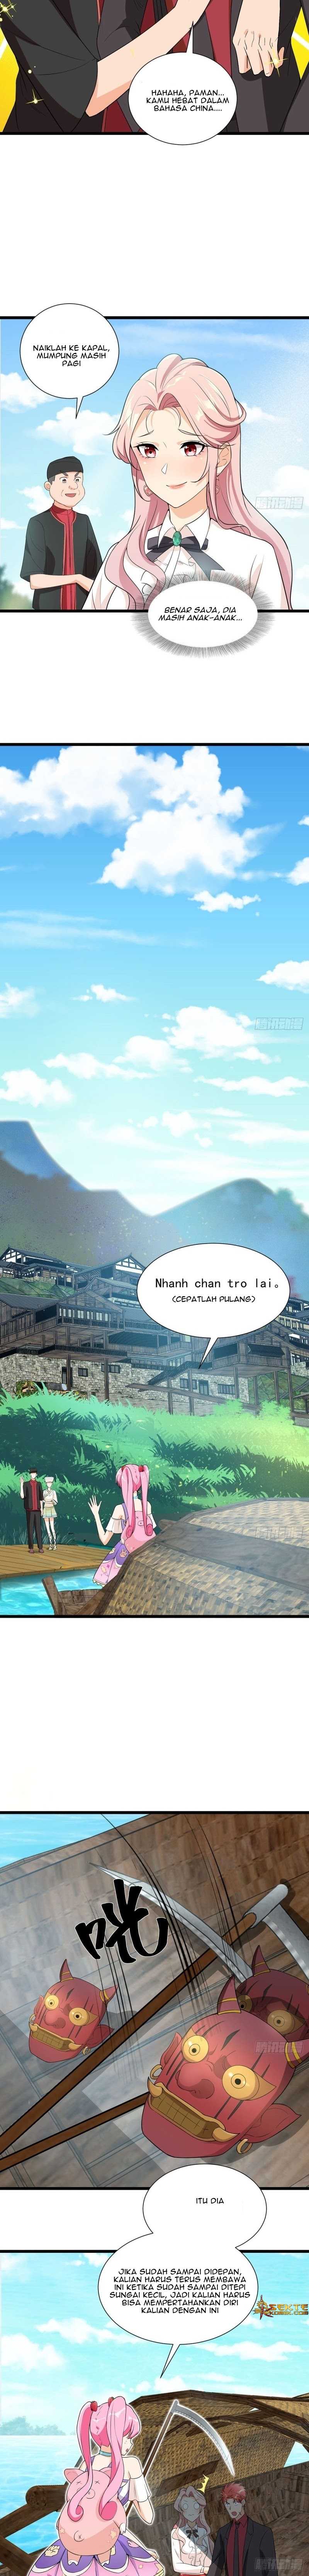 Dianfeng Chapter 65